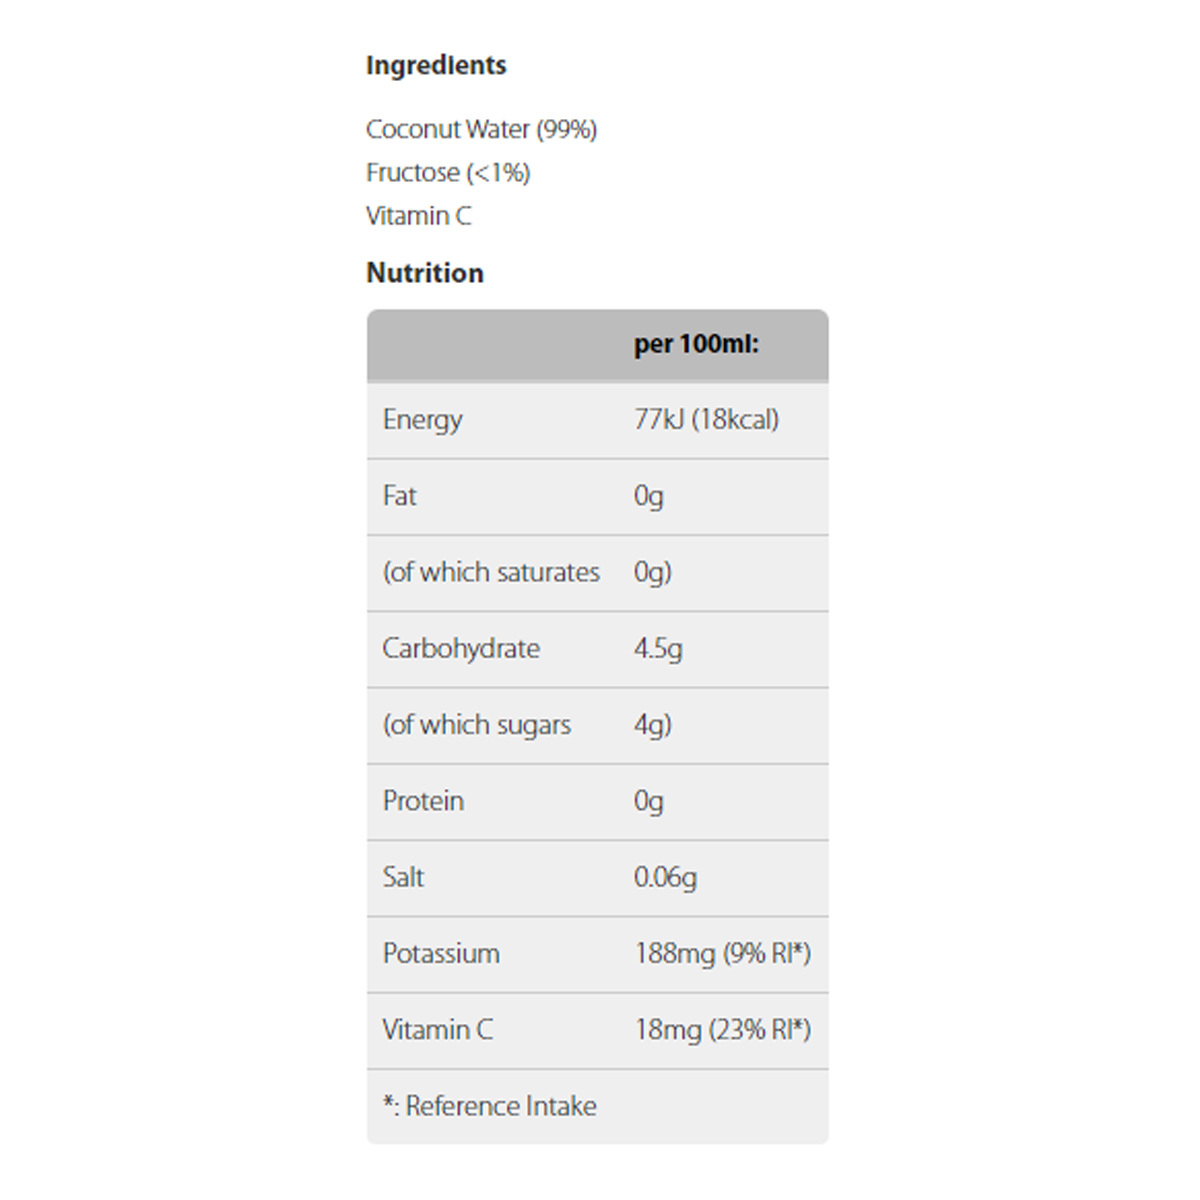 List of ingredients and nutritional information on white background